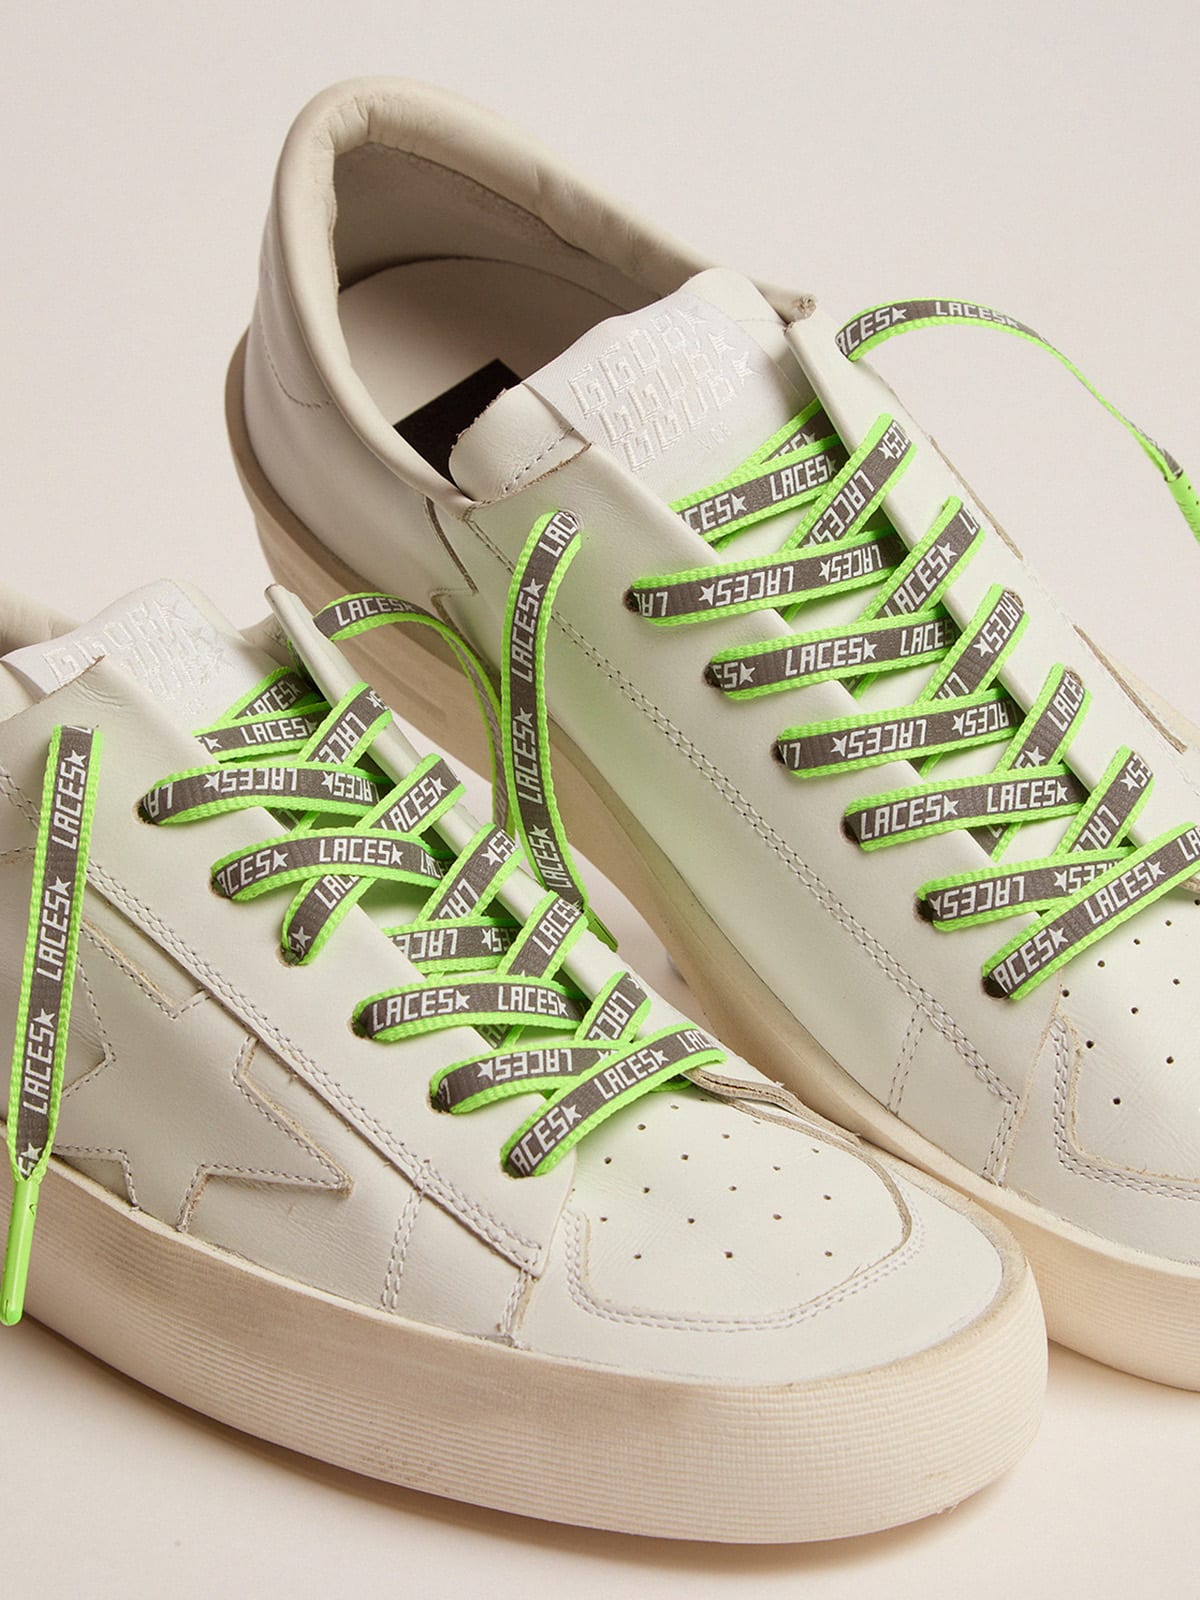 Golden Goose - Neon green reflective laces with laces print in 